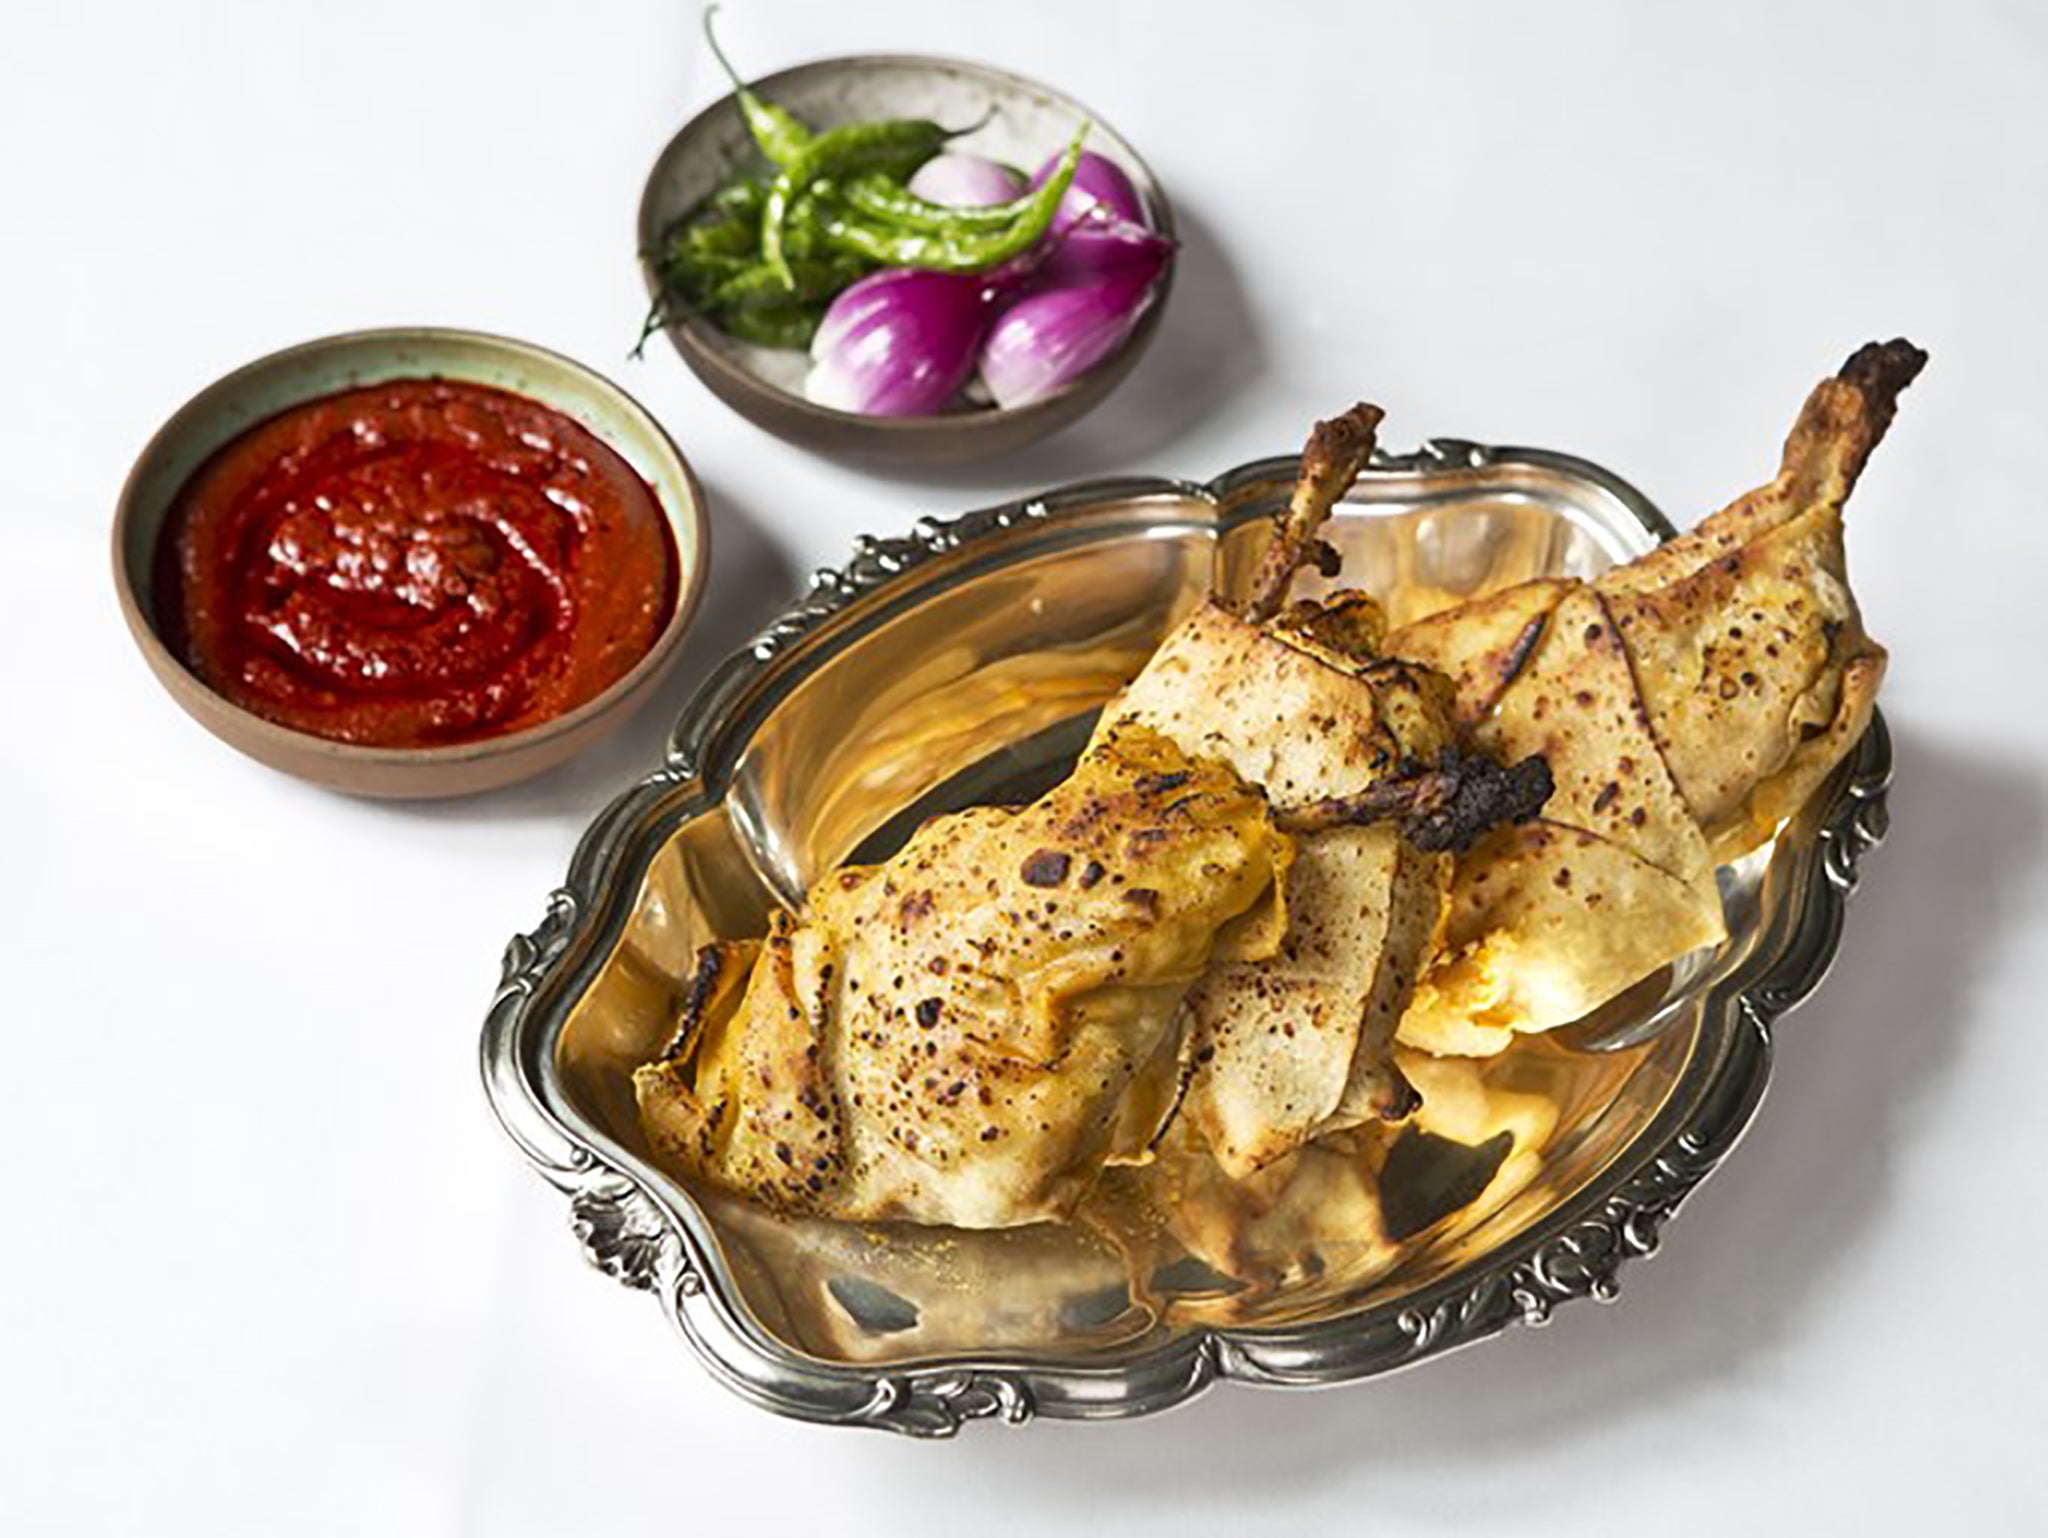 Khad murgh would be an ideal barbecue dish